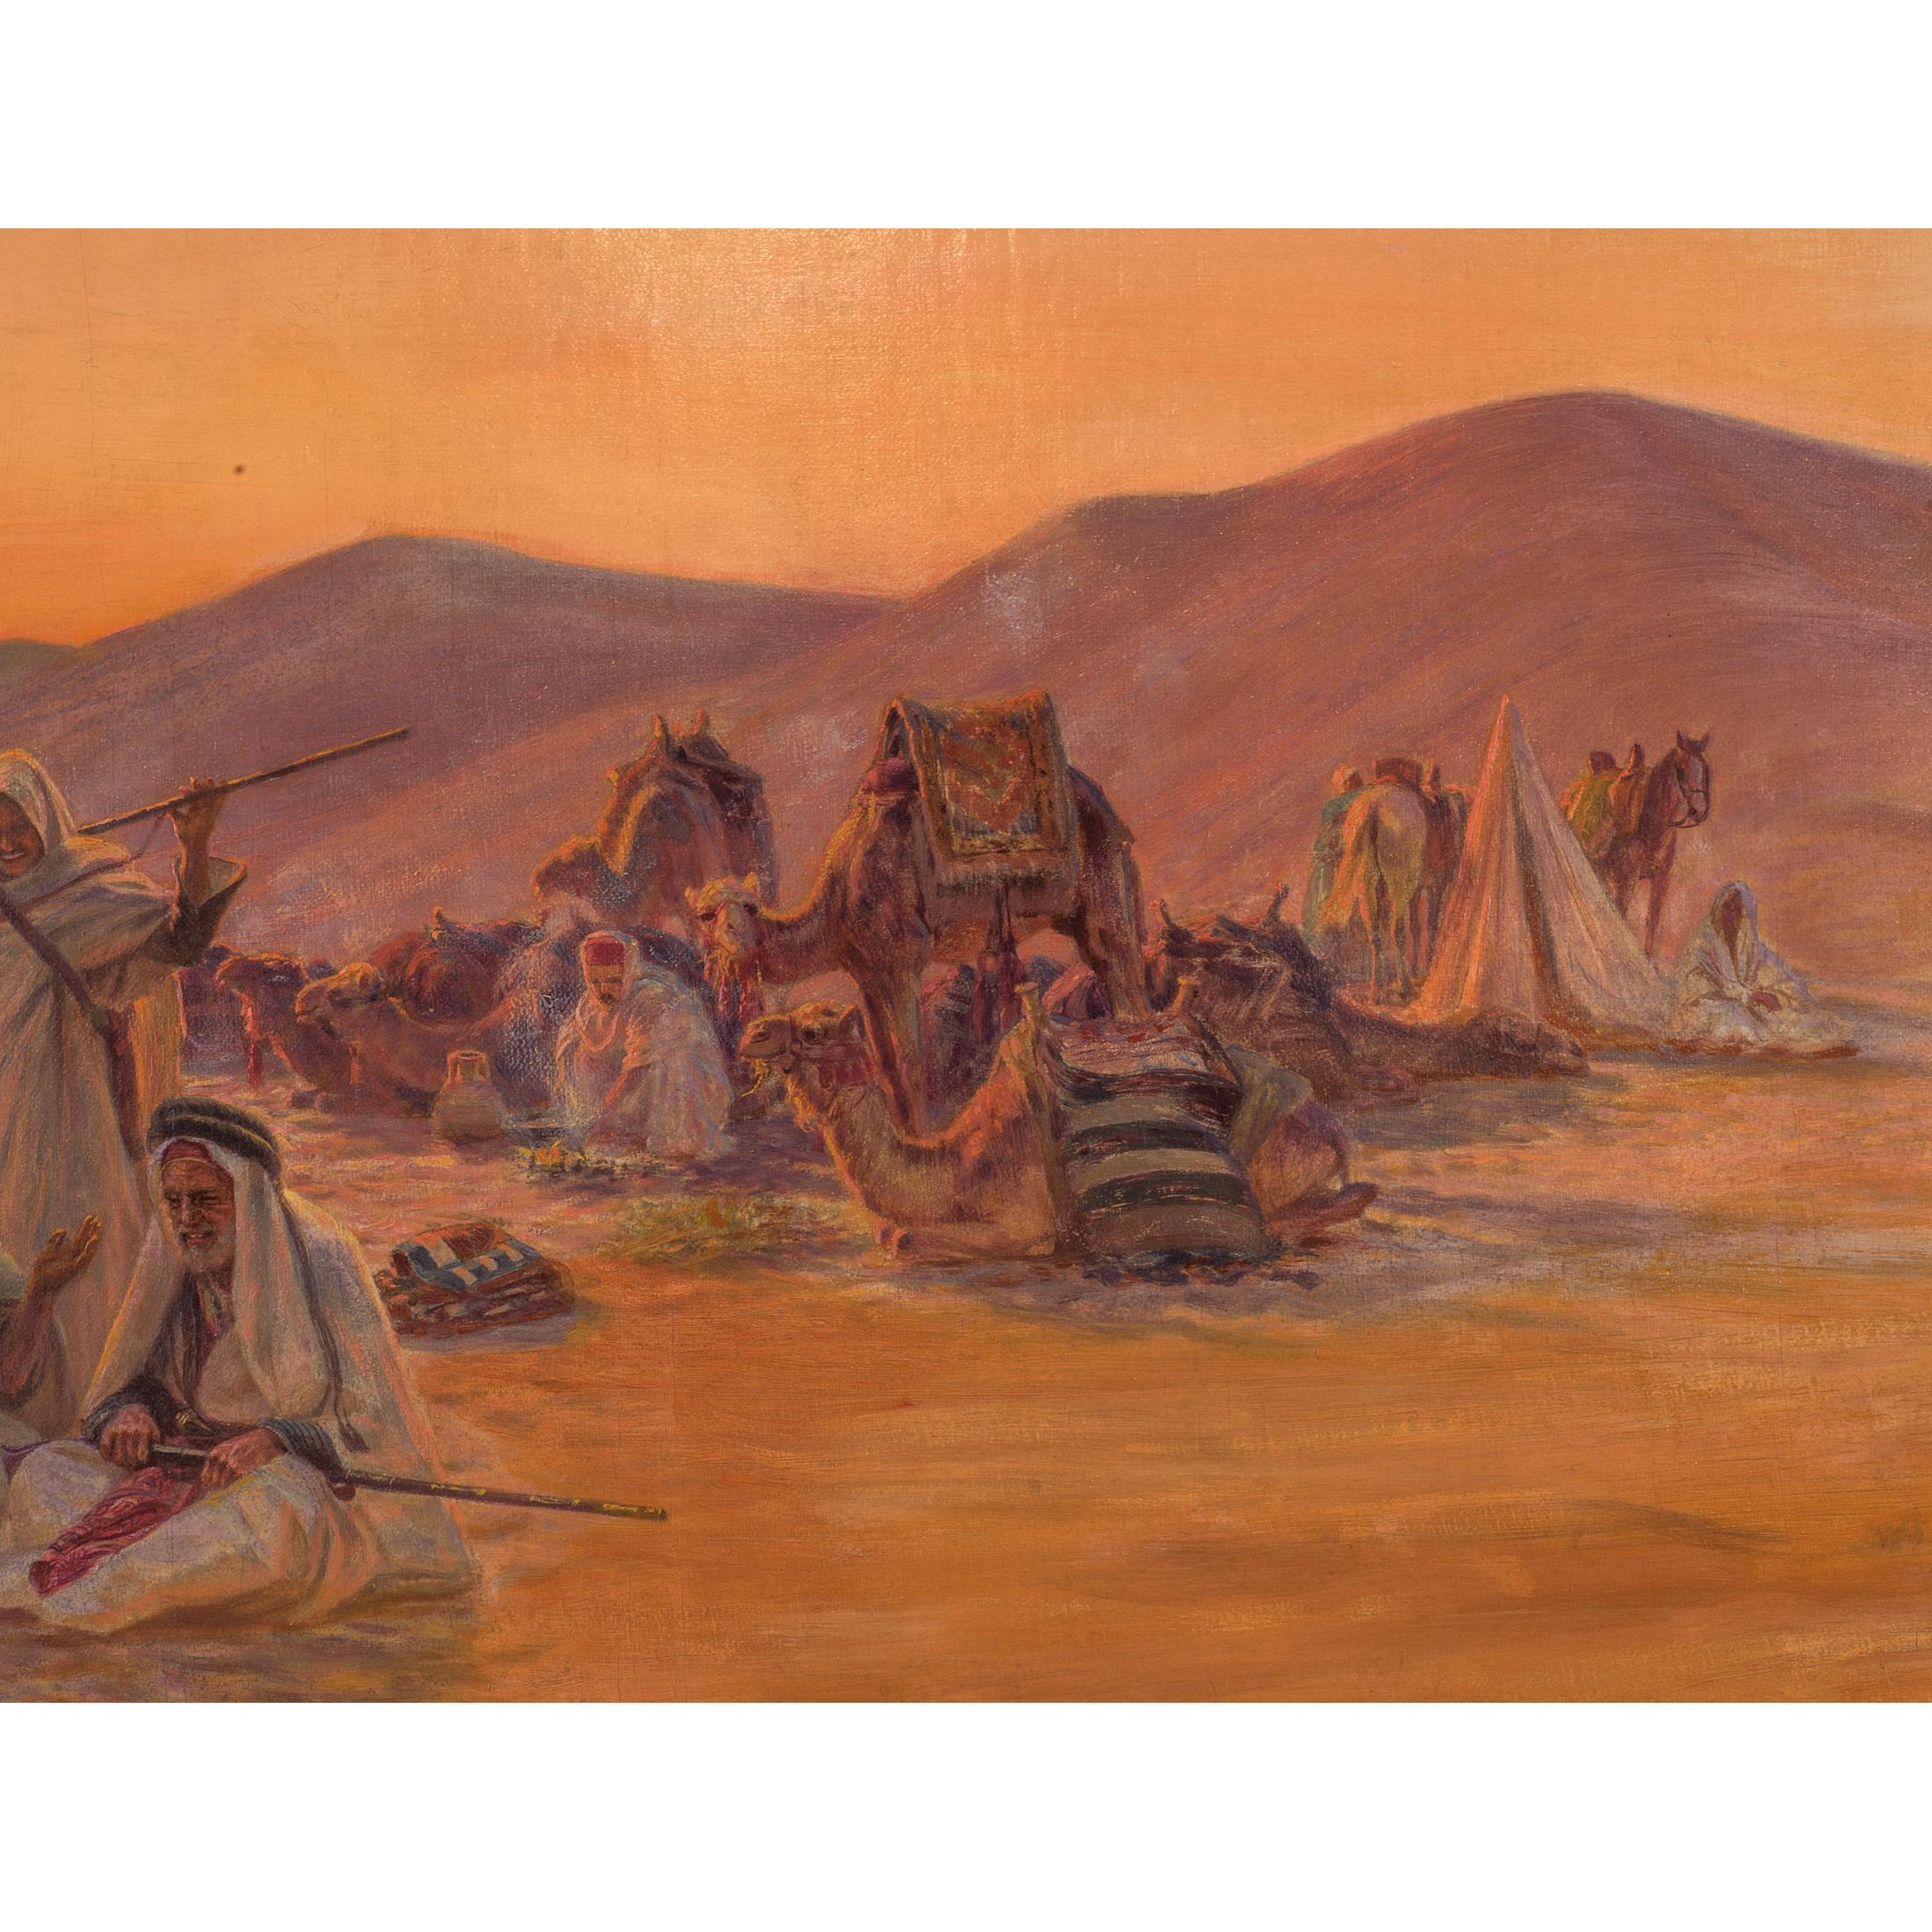 Painted Fine Orientalist Painting of a Bedouin Camp by Otto Pilny